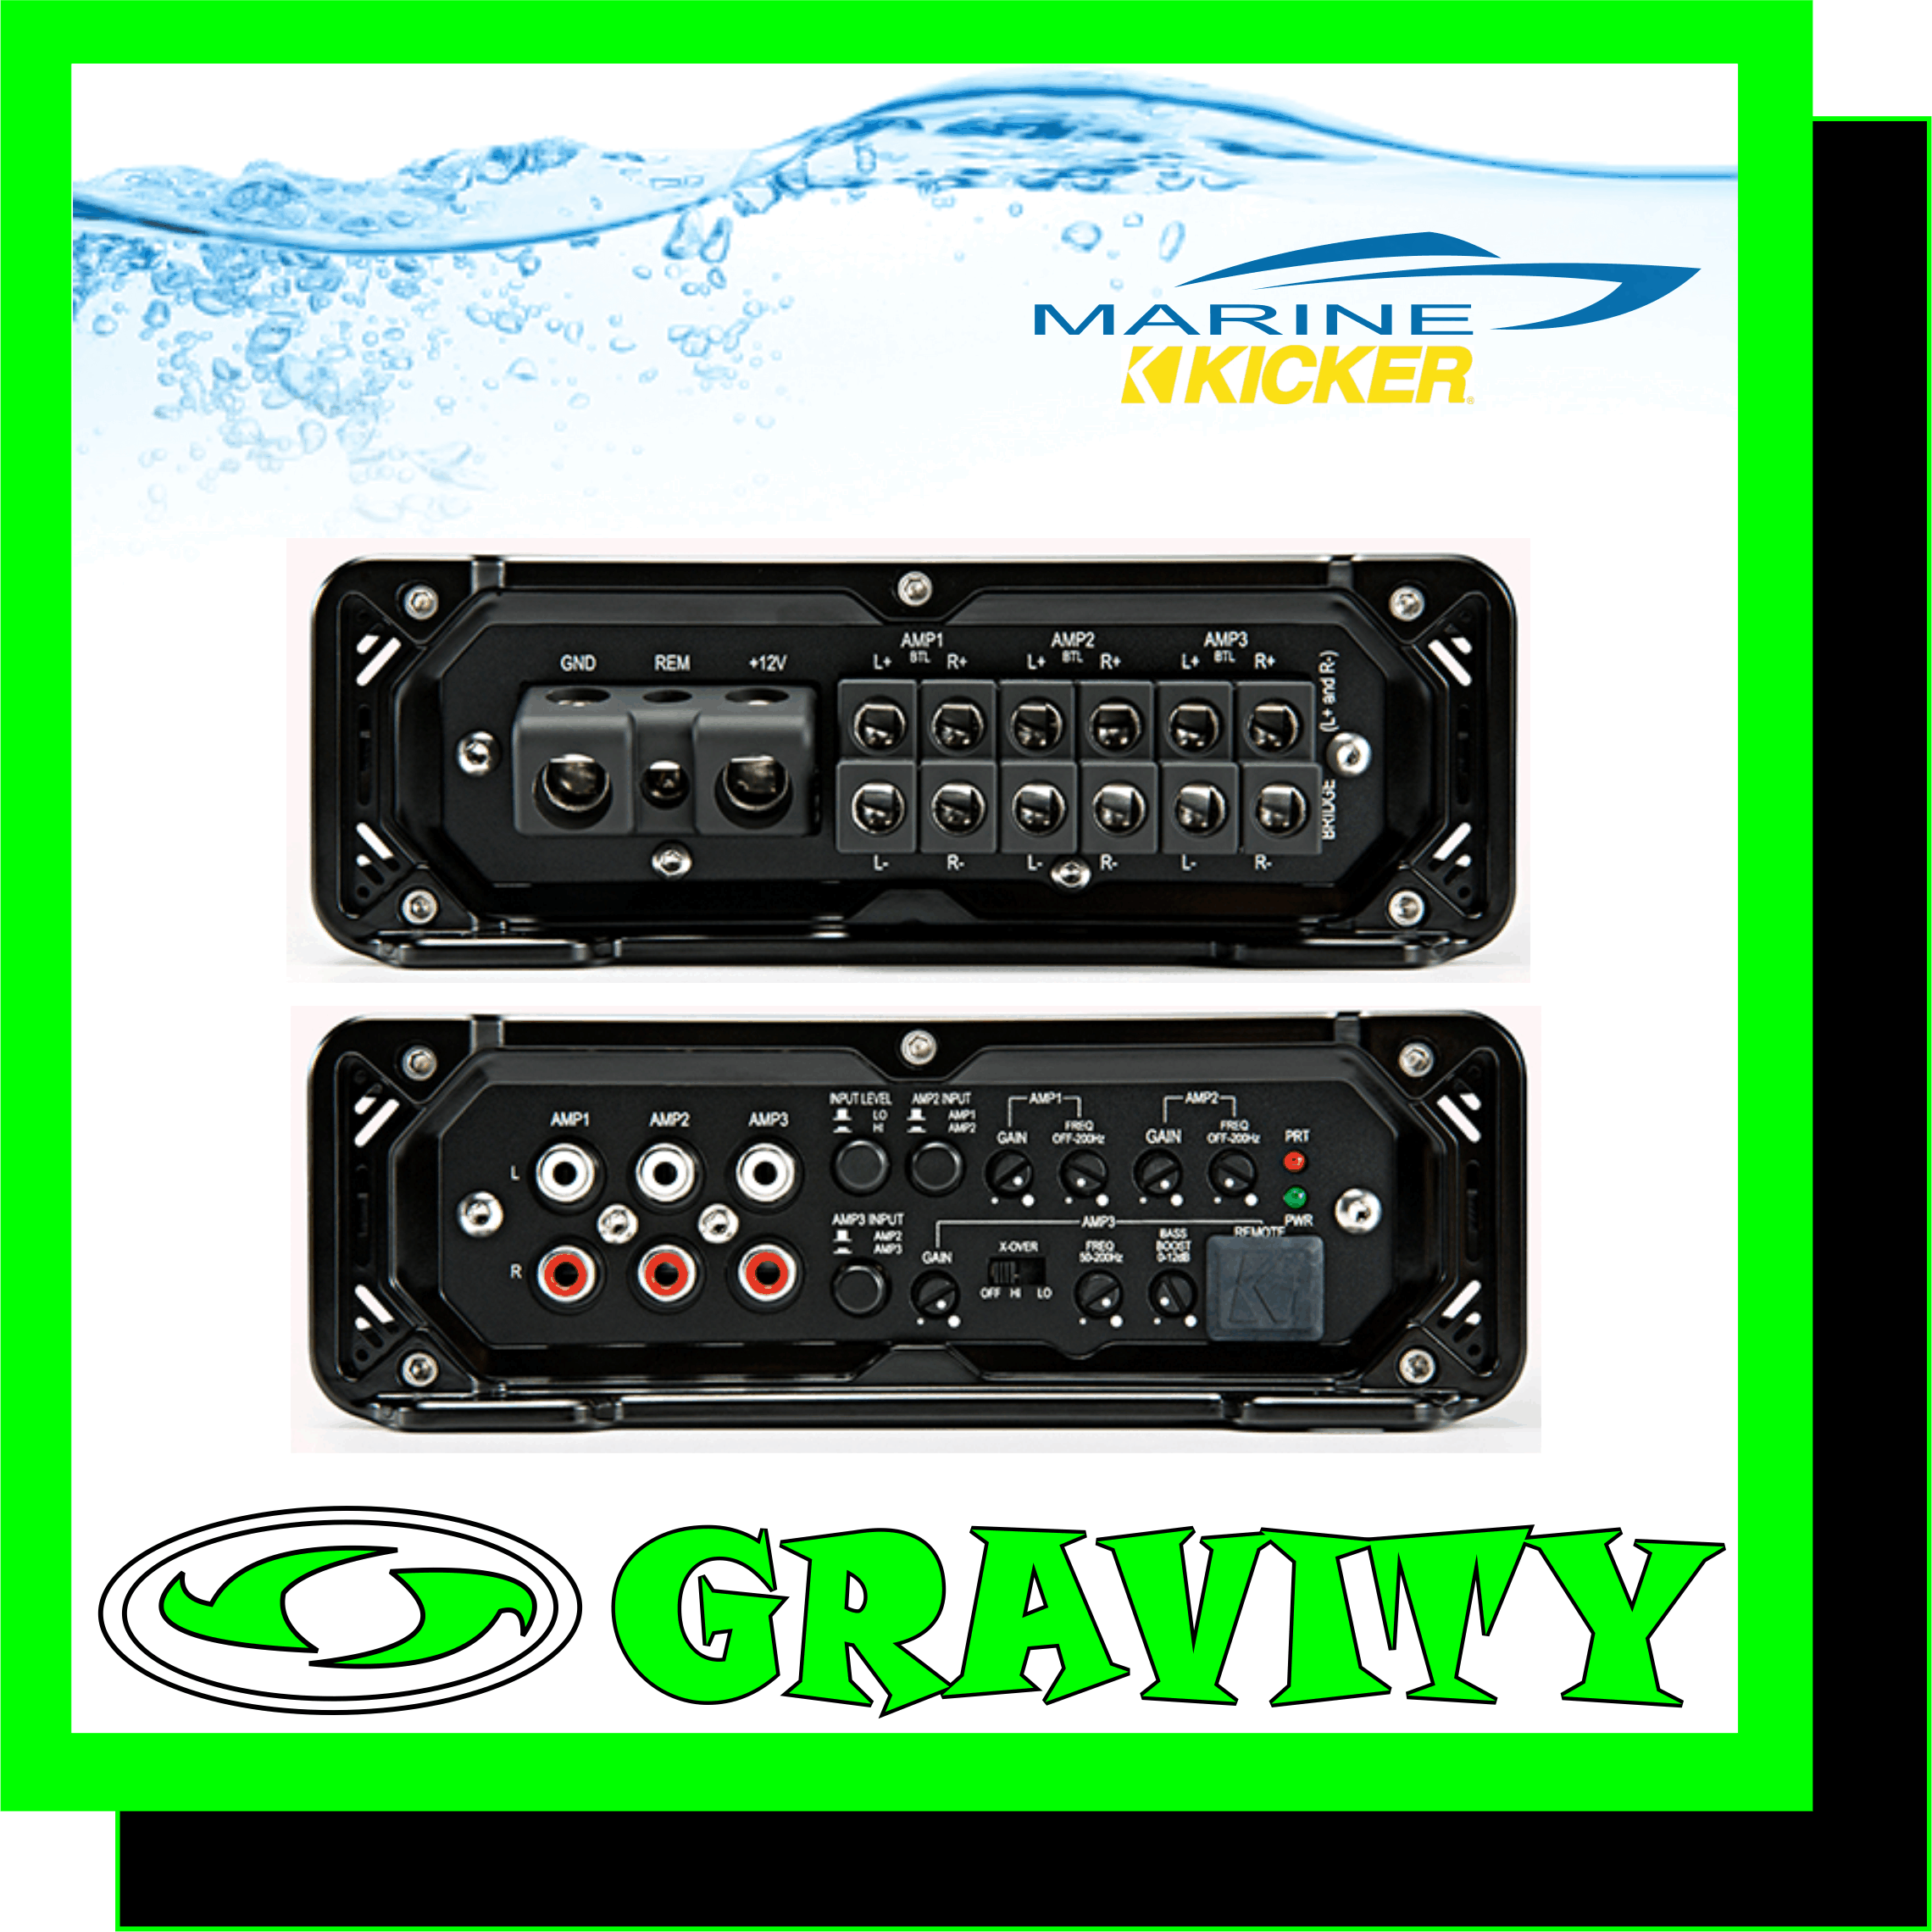 Kicker 45KMA4506 6-Channel 75Watt x 6 @ 2 Ohm Marine Class-D Amplifier  IN THE ZONE  With this KM Six-Channel Amp, your boat is a floating concert! Connect as many as 12 speakers in three independent zones to control the volume level on the tower speakers, and in the cabin or even the deck! A separate full-range level control connects to the amp for even more convenience. It?s truly one of the most versatile amps in marine audio.  This amp also features variable bass boost with KickEQ?, giving you as much as a 12dB of extra bump, as well as a powerful 12dB crossover and 24dB subsonic filter, letting you quickly tune your system to perfection.  Class-D Power Supply Six-Channel Amplifier With Bridging Capability Three-Zone Control Full-Range Volume Controller Included Conformal-Coated Circuit Board Variable 12dB Crossover 24dB Subsonic Filter (Amp 3 Only) KickEQ? Variable 12dB Bass Boost ABYC/NMMA-Compliant Power Connections 316L Stainless-Steel Hardware Included Specifications:  KMA450.6 6-Channel 75Watt x 6 @ 2 Ohm Marine Class-D Amplifier:  POWER [watts/ch], 2 OHM STEREO: 75 x 6 POWER [watts/ch], 4 OHM BRIDGED MONO: 150 x 3 Class-D Power Supply Six-Channel Amplifier With Bridging Capability Three-Zone Control Full-Range Volume Controller Included Conformal-Coated Circuit Board Variable 12dB Crossover 24dB Subsonic Filter (Amp 3 Only) KickEQ? Variable 12dB Bass Boost ABYC/NMMA-Compliant Power Connections 316L Stainless-Steel Hardware Included What?s in the Box: 1 ? power amplifier 1 ? remote control 1 ? remote cable 1 ? user manual, mounting hardware   KMA450.6 6-Channel 75Watt x 6 @ 2 Ohm Marine Class-D Amplifier Big sound meets big value. Use this flexible KM Six-Channel Marine Amplifier to power your system with ease and pump up the sound like only KICKER can! With this KM Six-Channel Amp, your boat is a floating concert! Connect as many as 12 speakers in three independent zones to control the volume level on the tower speakers, and in the cabin or even the deck! A separate full-range level control connects to the amp for even more convenience. It?s truly one of the most versatile amps in marine audio. This amp also features variable bass boost with KickEQ?, giving you as much as a 12dB of extra bump, as well as a powerful 12dB crossover and 24dB subsonic filter, letting you quickly tune your system to perfection.  